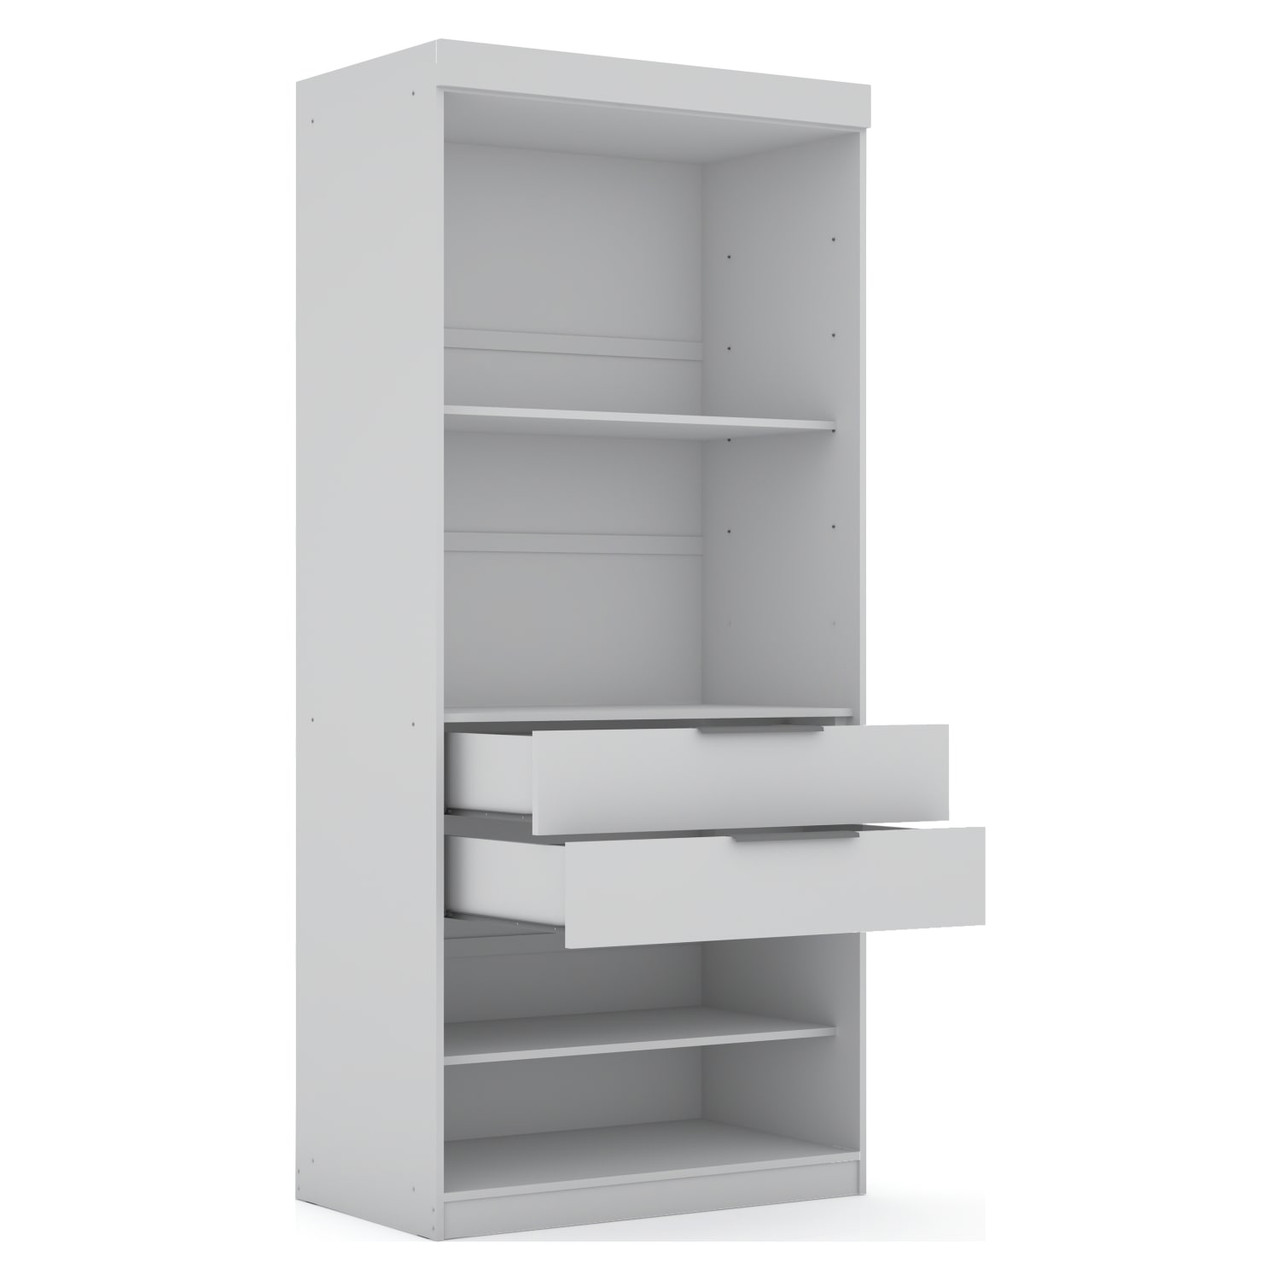 Mulberry 2.0 Semi Open 3 Sectional Modern Wardrobe Corner Closet with 4 Drawers - Set of 3 in White